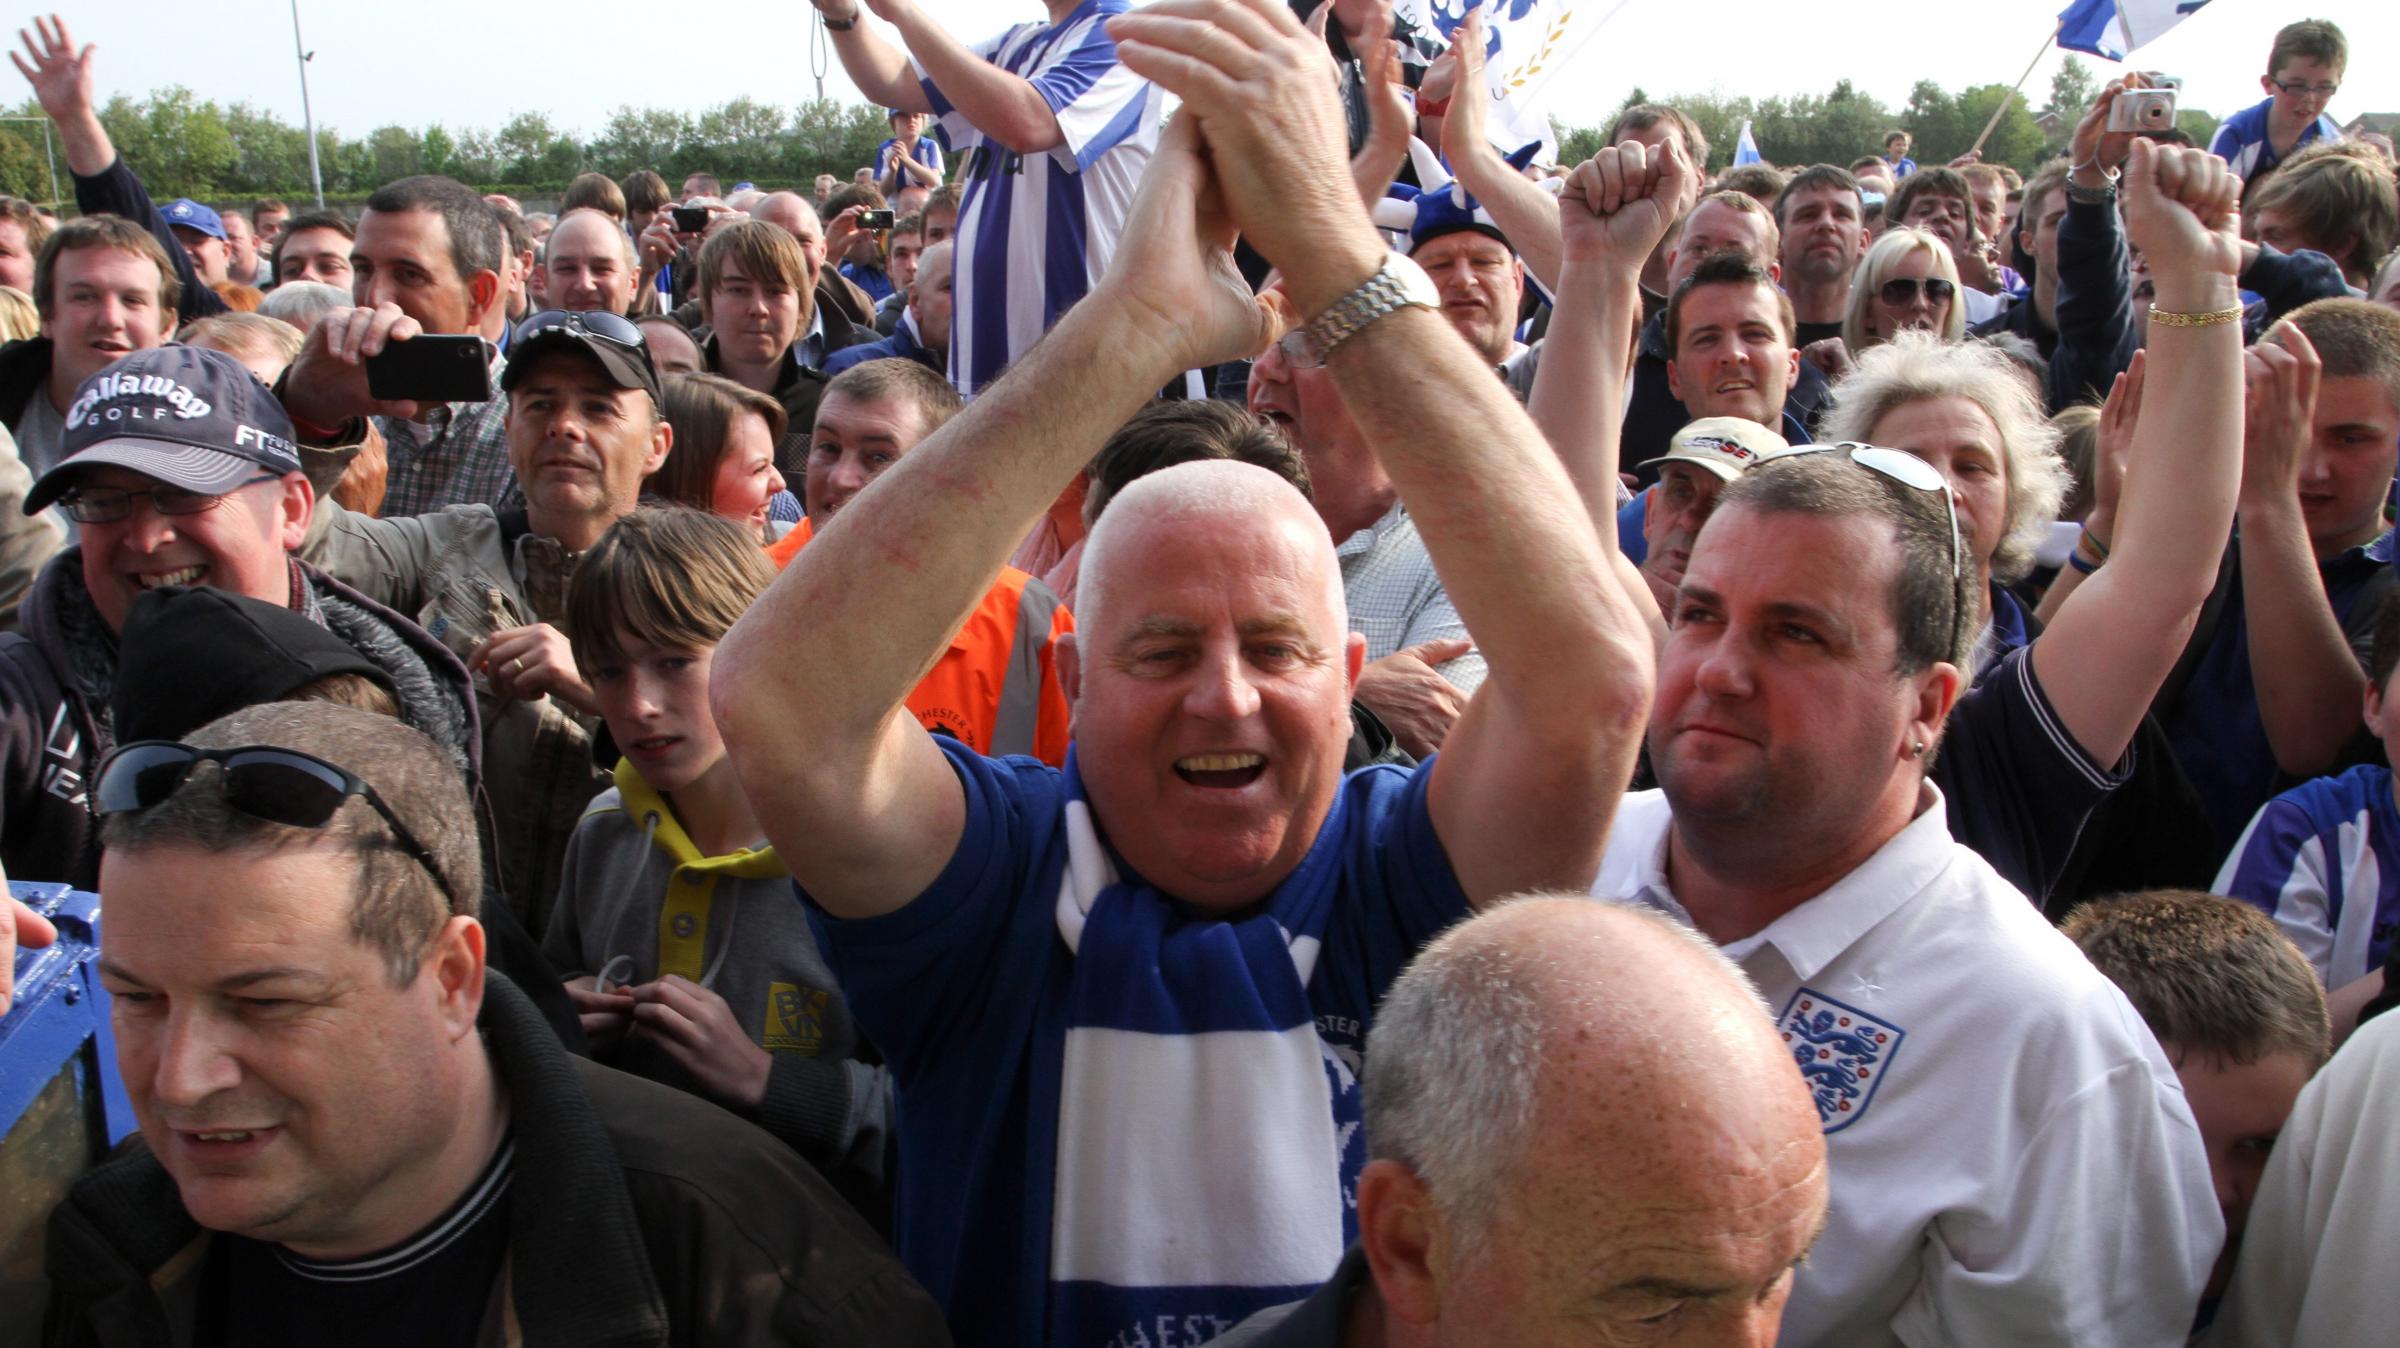 Jubilant scenes of Chester FC in 2011, having clinched the Evo-Stik Division One North title - just - on the final day of the season. Pictures: RICK MATTHEWS.